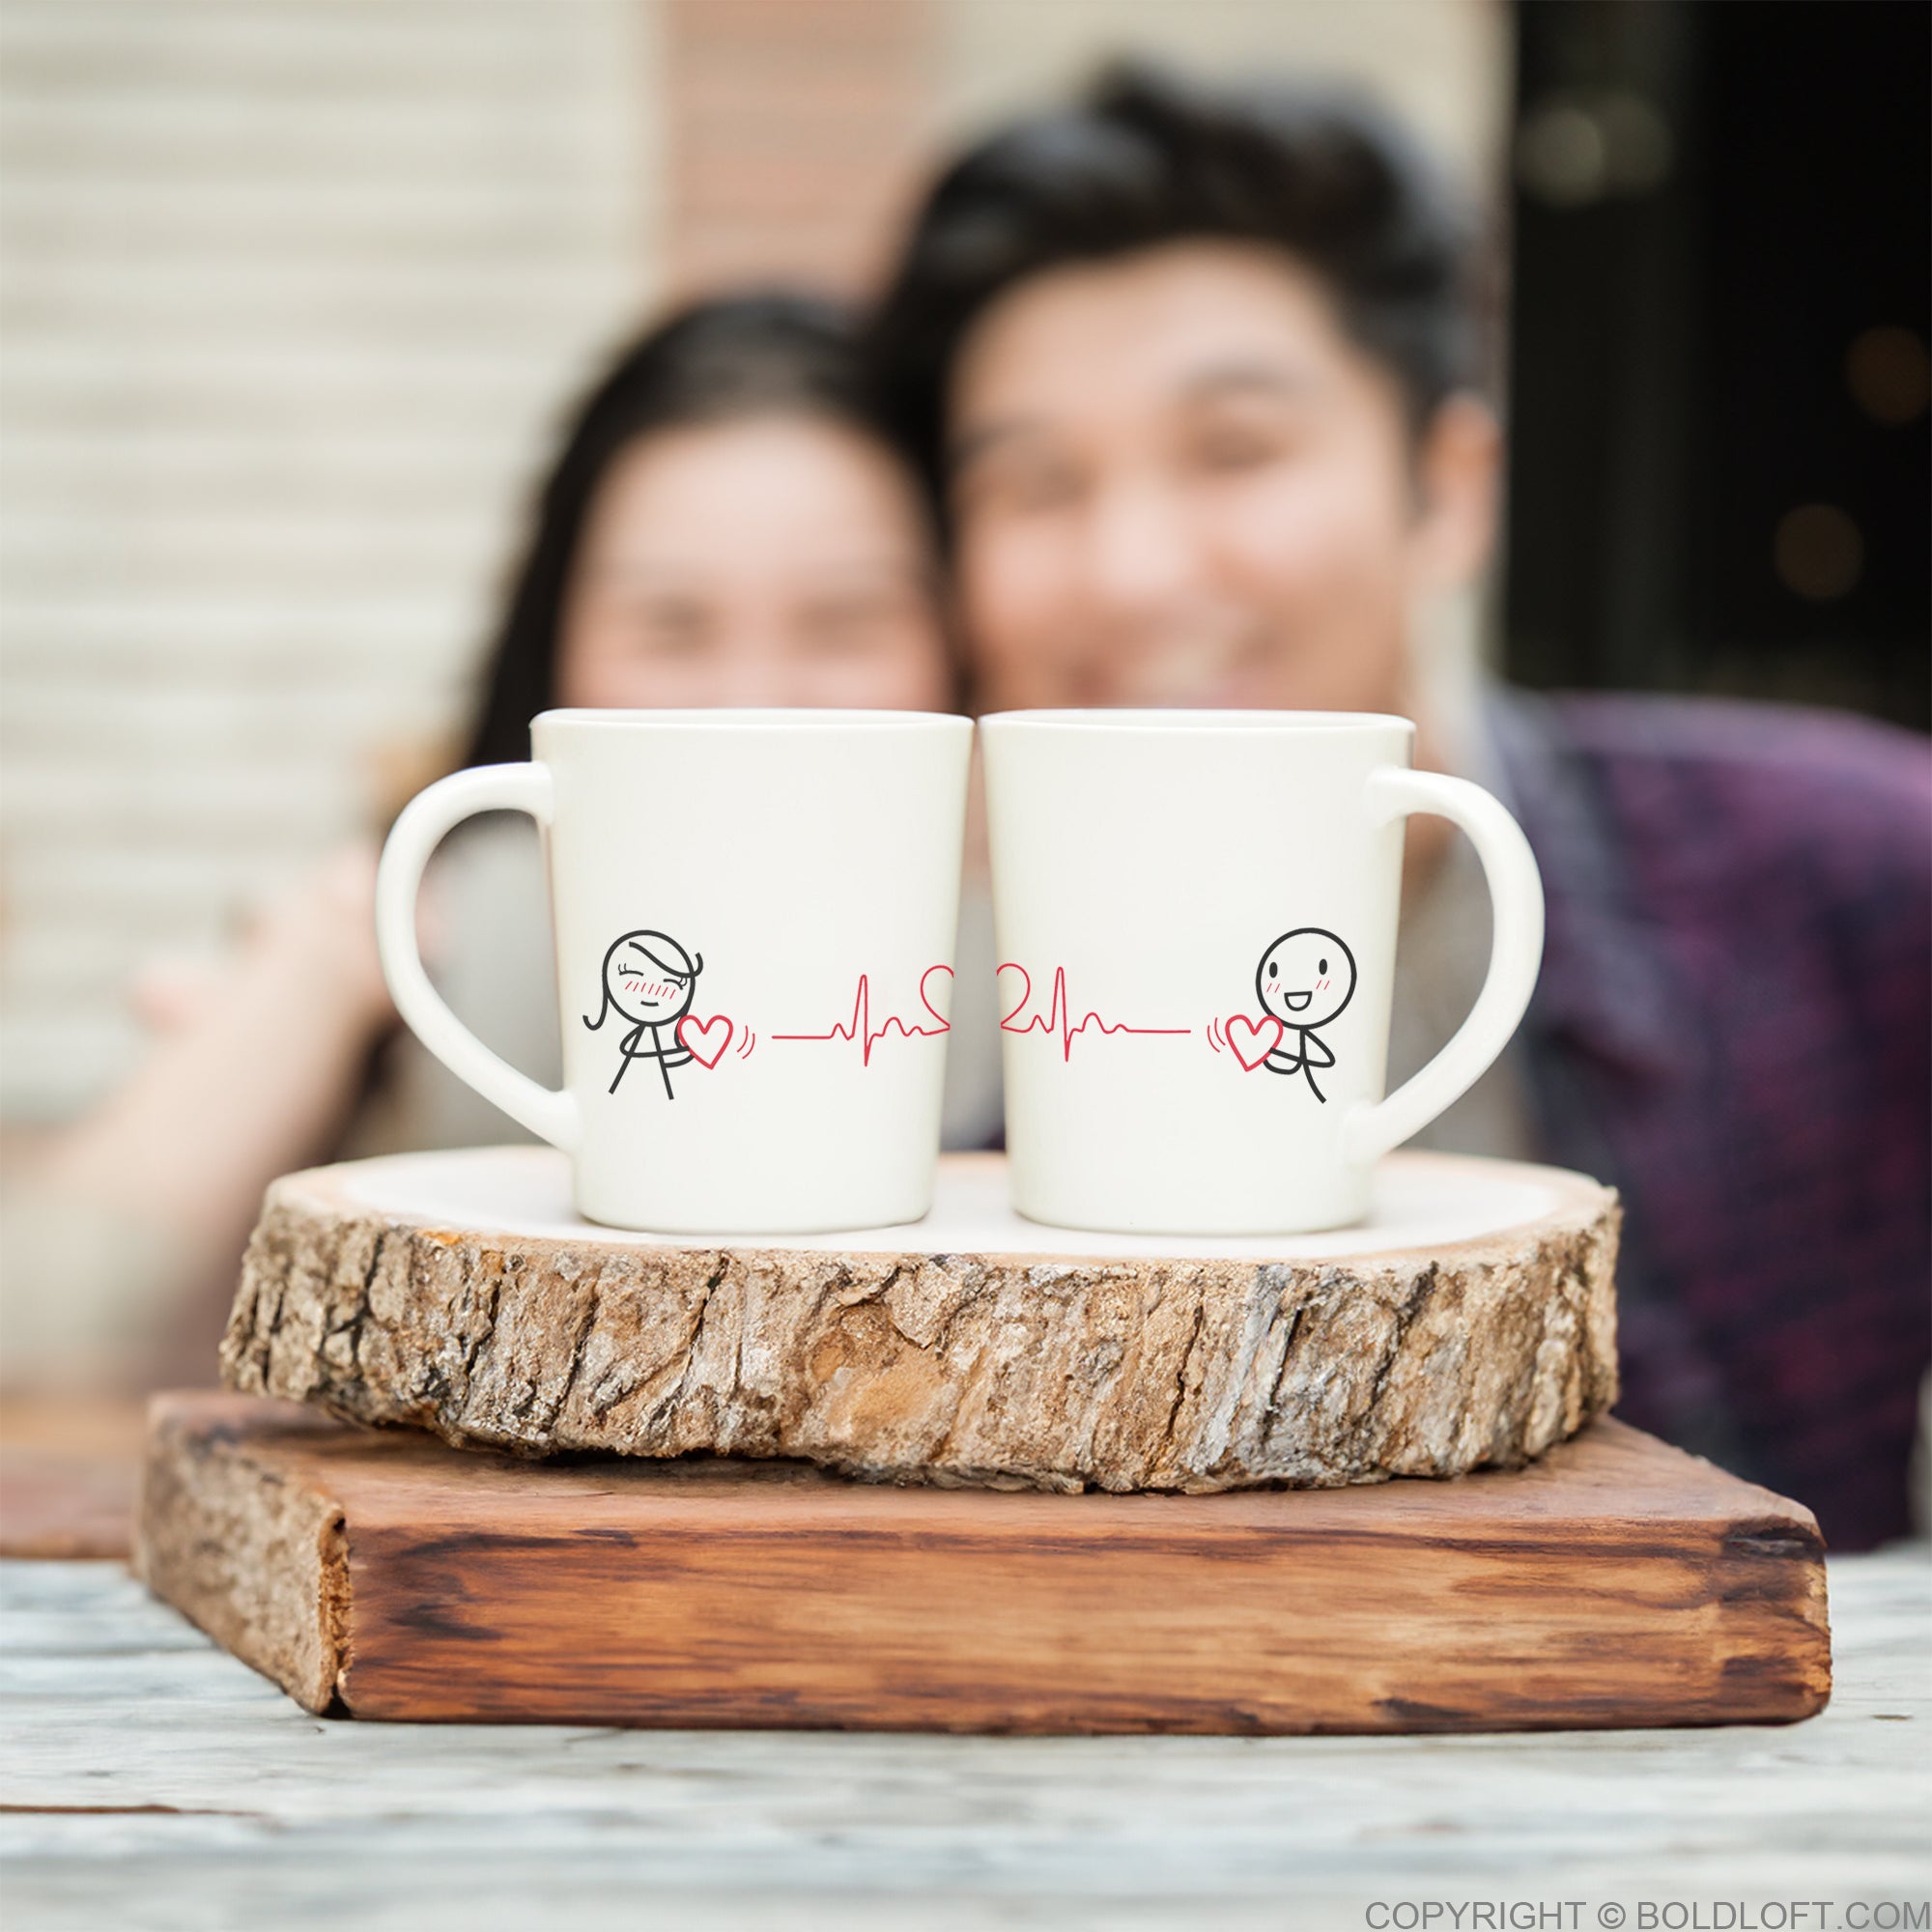 BoldLoft Love You with Every Beat of My Heart Couple Mugs- His and hers mugs for couples feature heartfelt designs